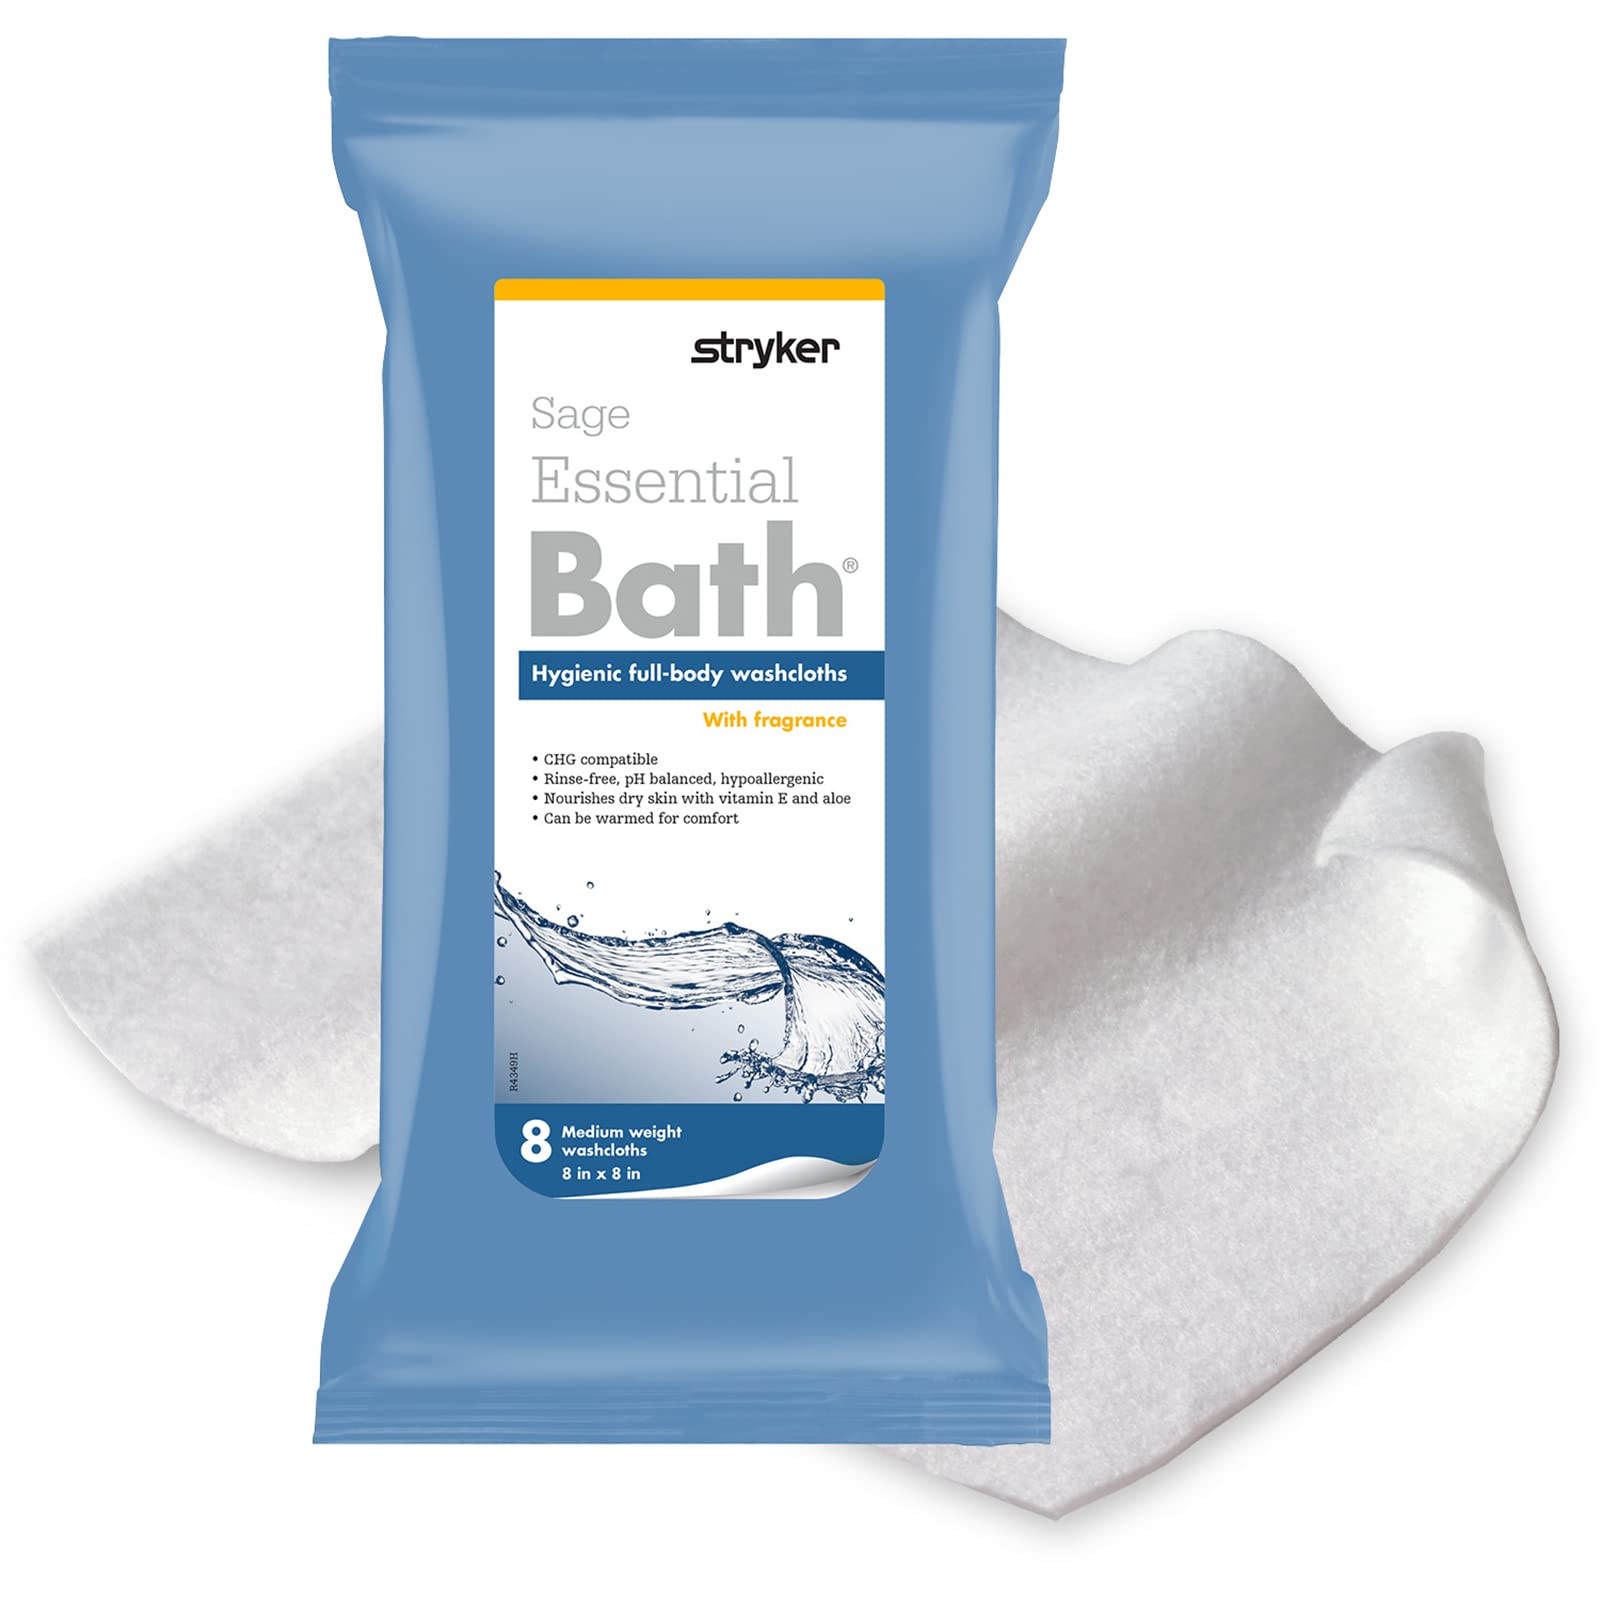 Stryker - Sage Essential Bath Cleansing Washcloths - 1 Package, 8 Cloths - Fresh Scent, No-Rinse Bathing Wipes, Ultra-Soft and Medium Weight Cloth, Hypoallergenic